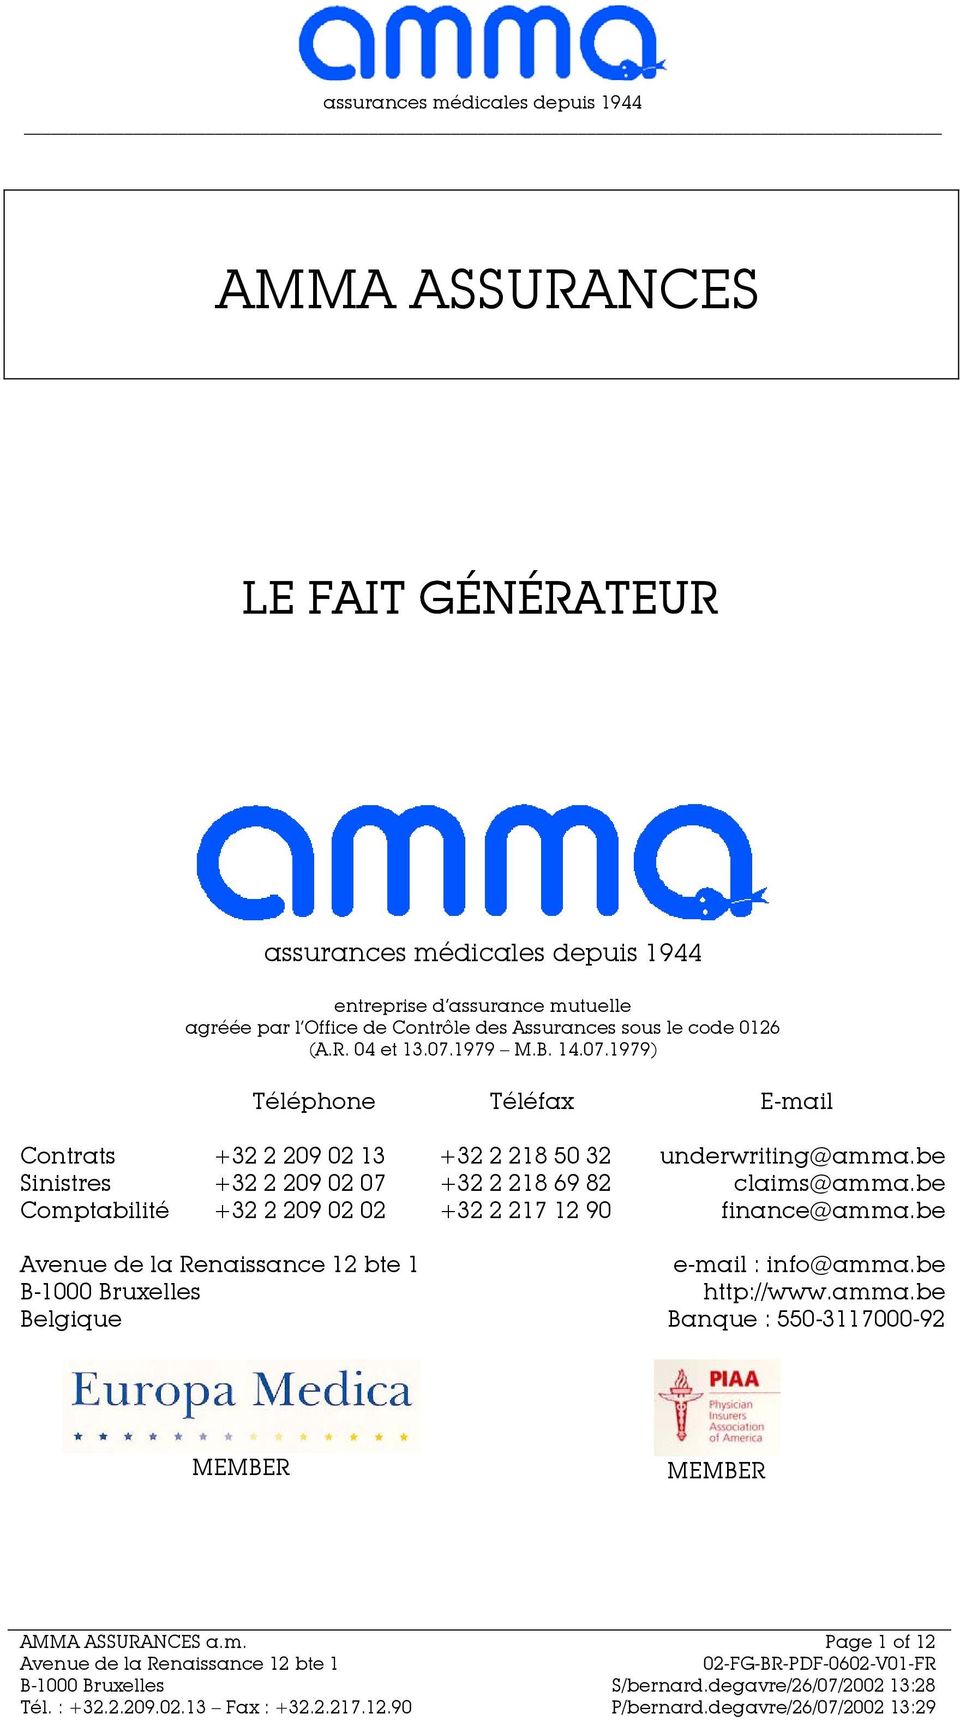 be Sinistres +32 2 209 02 07 +32 2 218 69 82 claims@amma.be Comptabilité +32 2 209 02 02 +32 2 217 12 90 finance@amma.